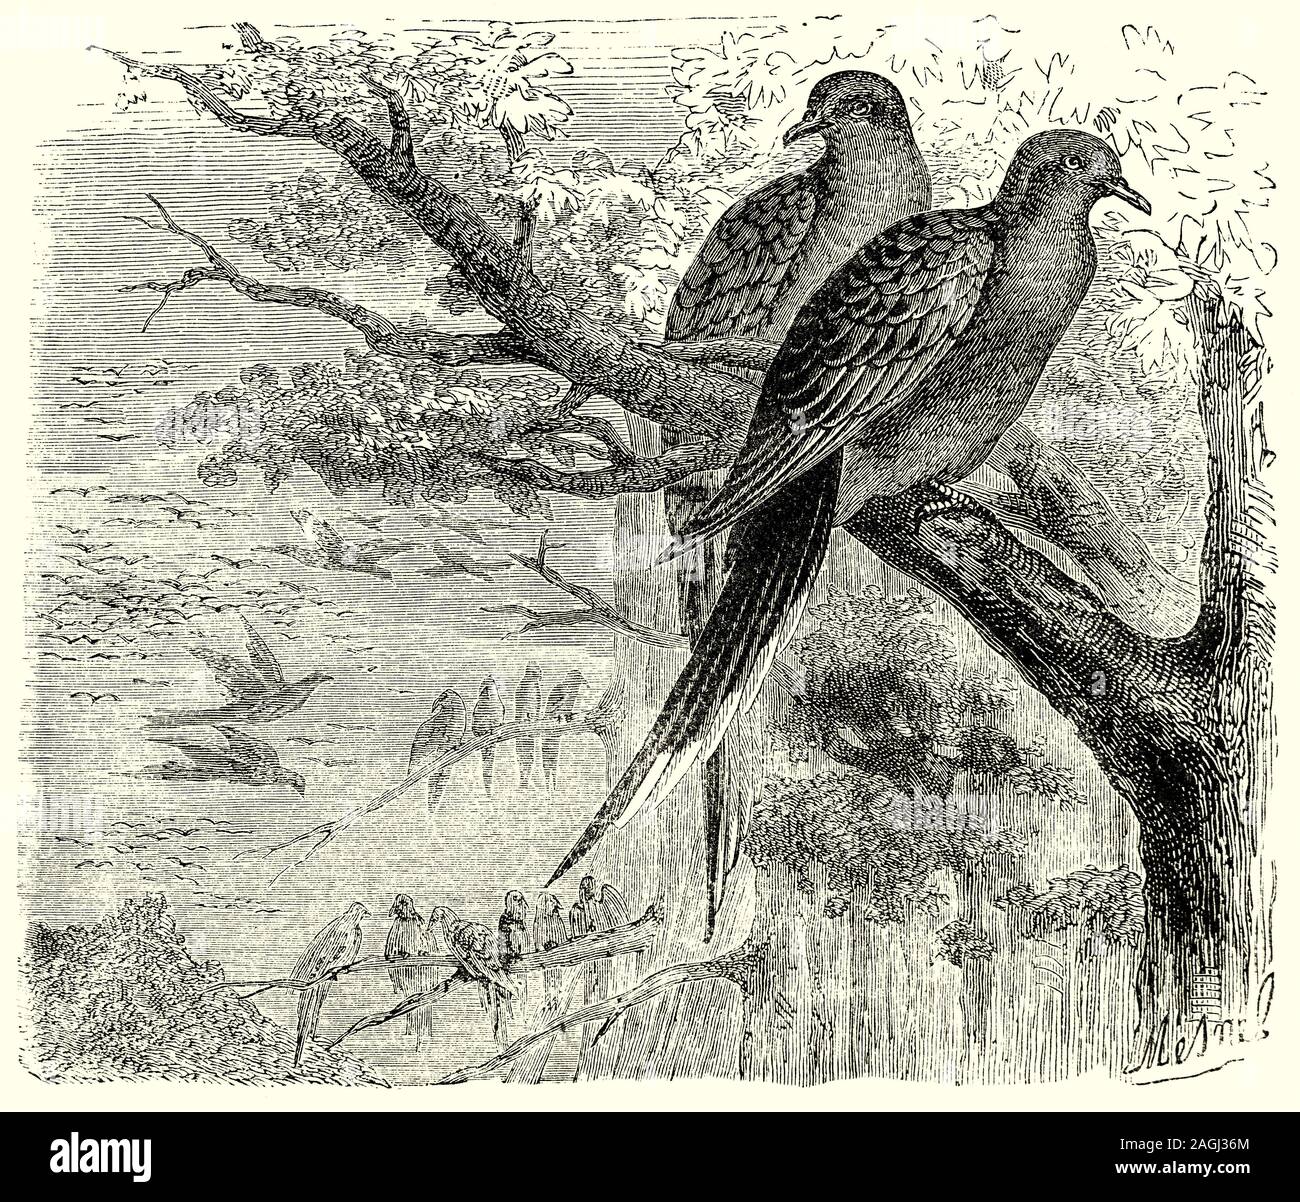 Ornithology: Breeding and Nests:  The passenger pigeon (Ectopistes migratorius) was endemic to North America. Its name is derived from the migratory habits of the species, mostly connected with finding places appropriate for this communally breeding bird to nest and raise its young. The colonies, which were known as 'cities', were immense, upto thousands of hectares in size. The main reasons for the extinction of the passenger pigeon were the massive scale of hunting, the rapid loss of habitat, and the extremely social lifestyle of the bird, which made it highly vulnerable. Stock Photo